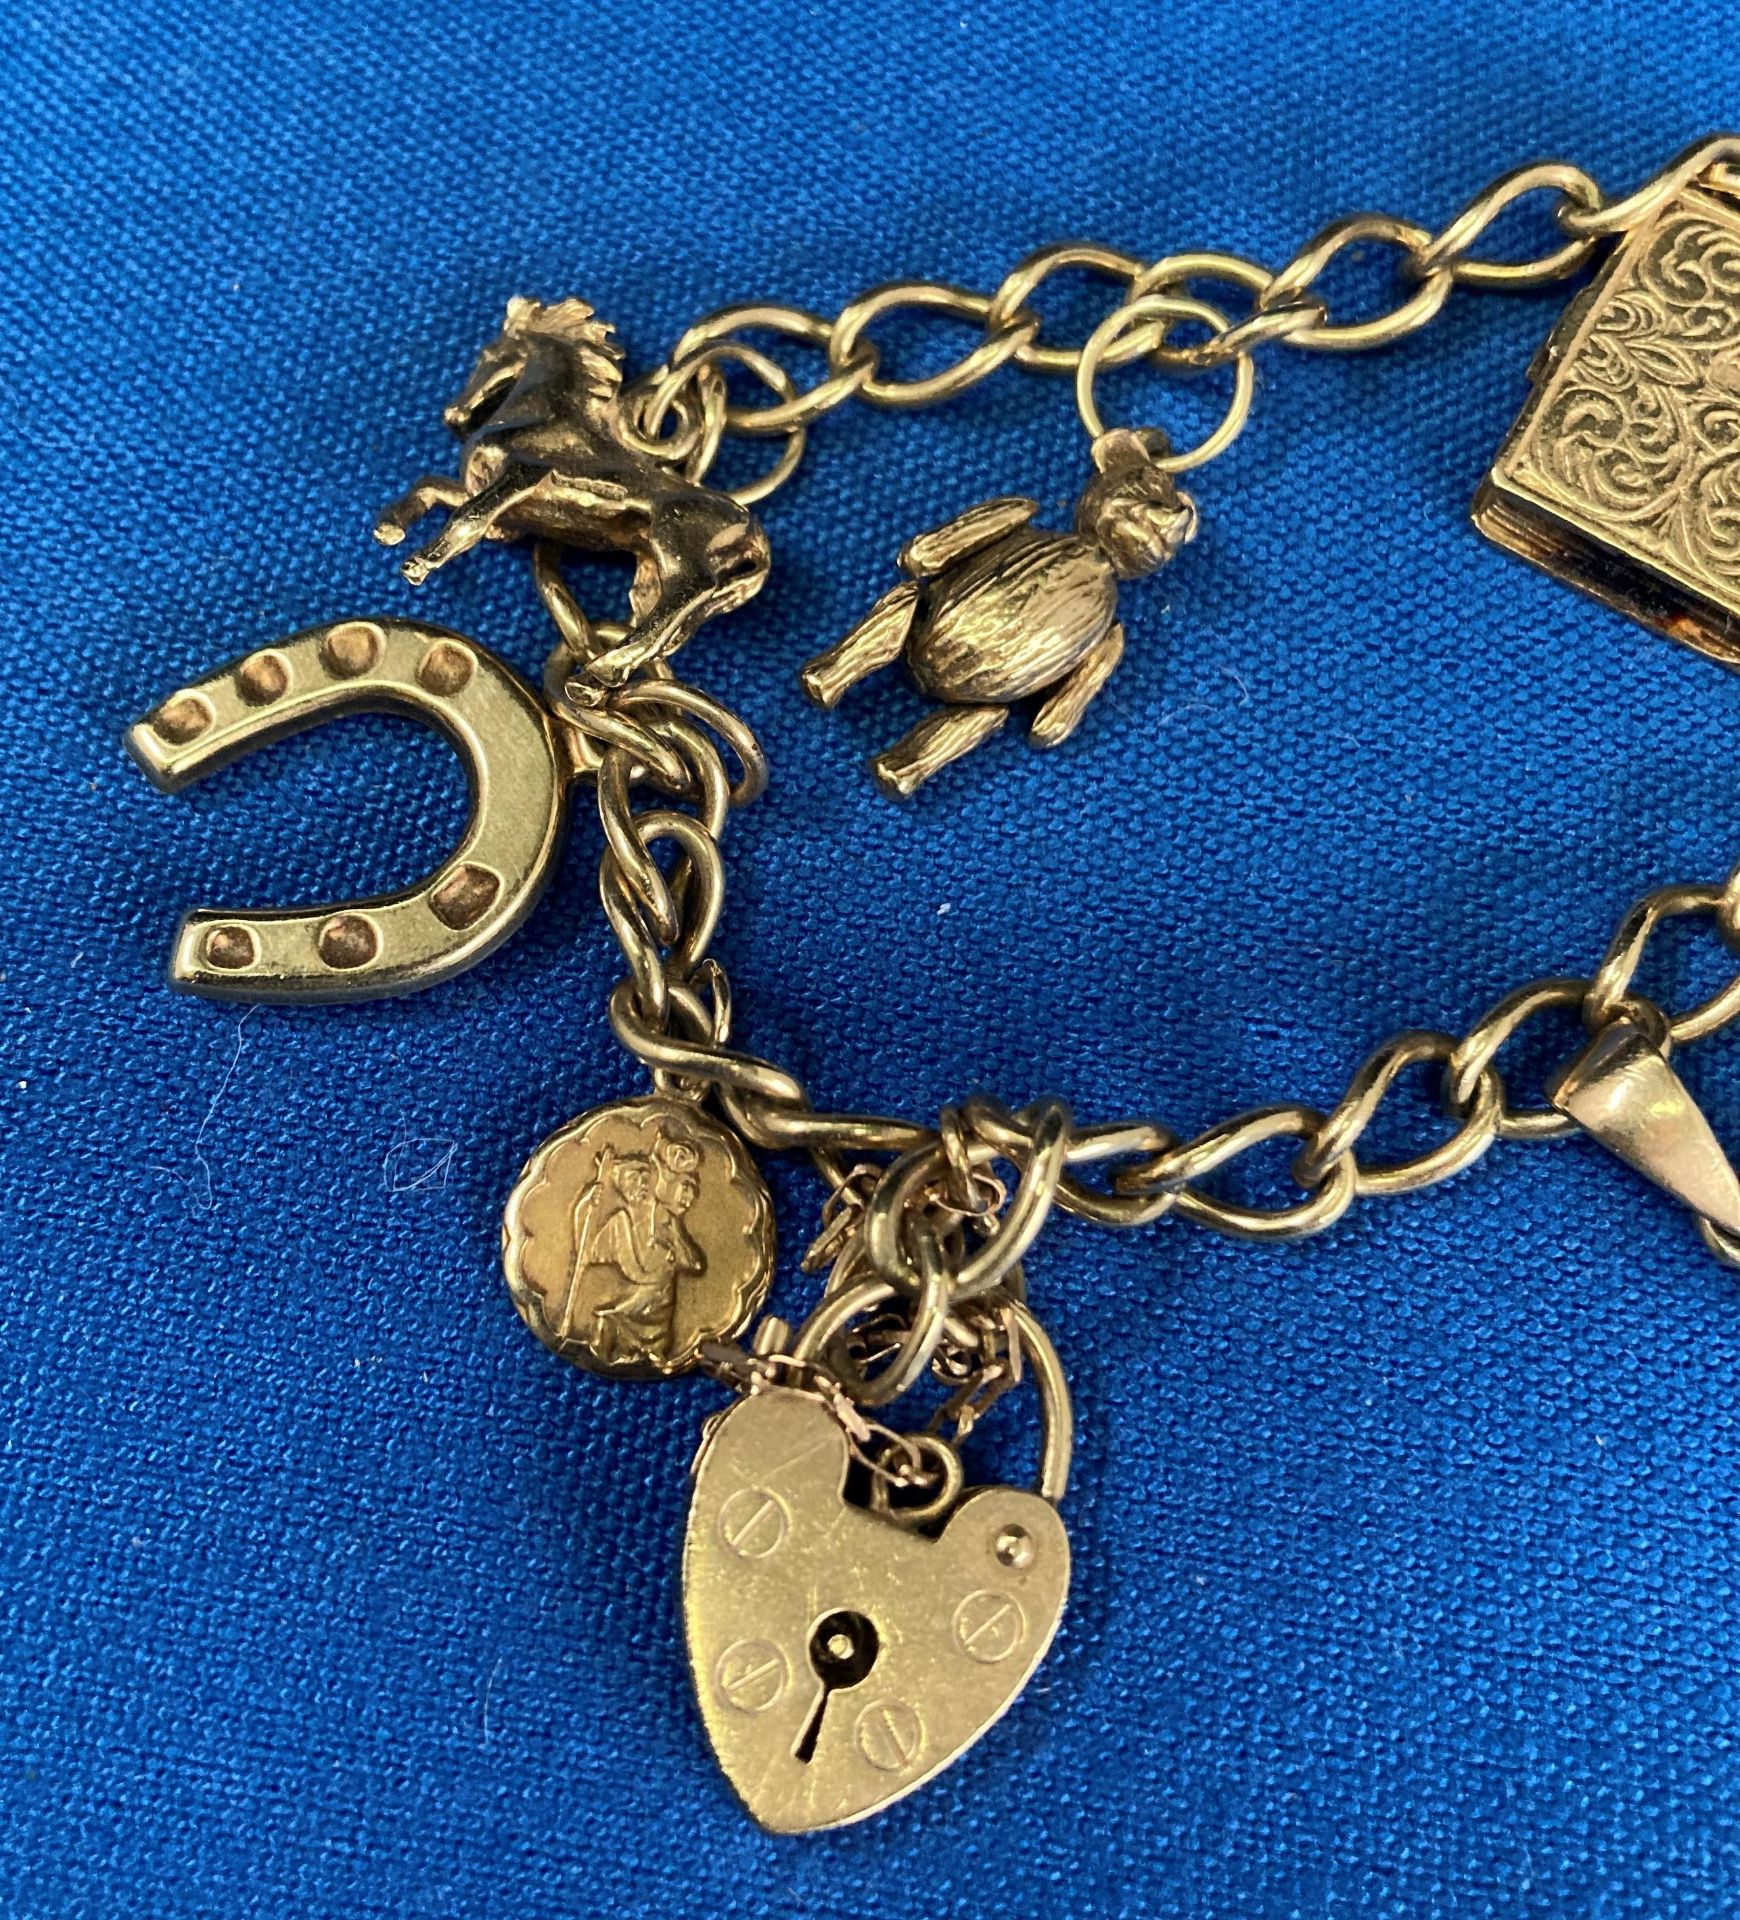 9ct gold charm gate bracelet with heart-shaped clasp and charms, 7" long. - Image 3 of 5